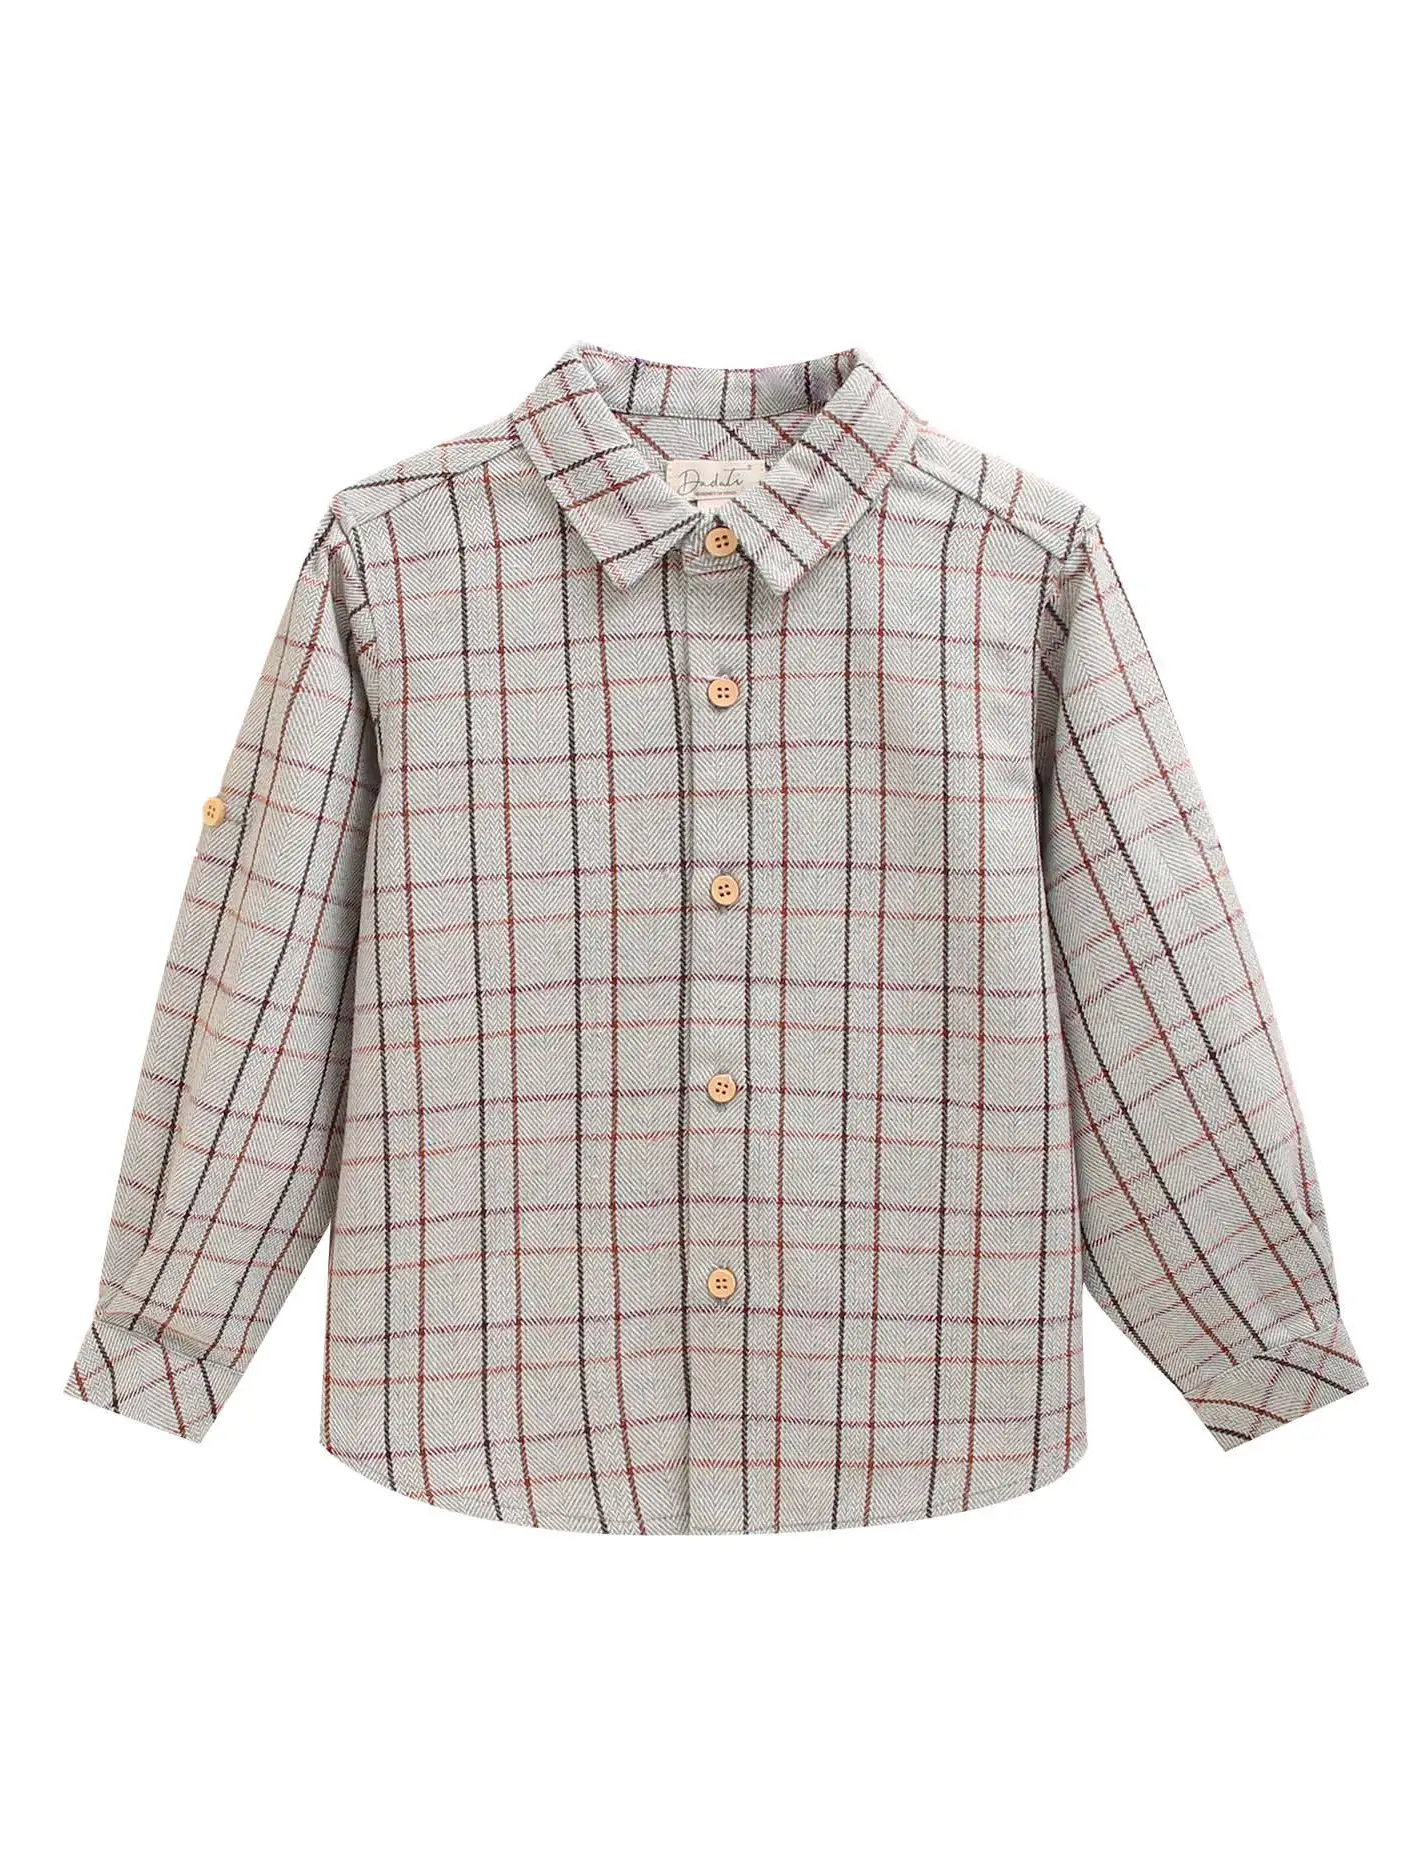 Gray Boy's Shirt with Red, Maroon and Brown Checkered